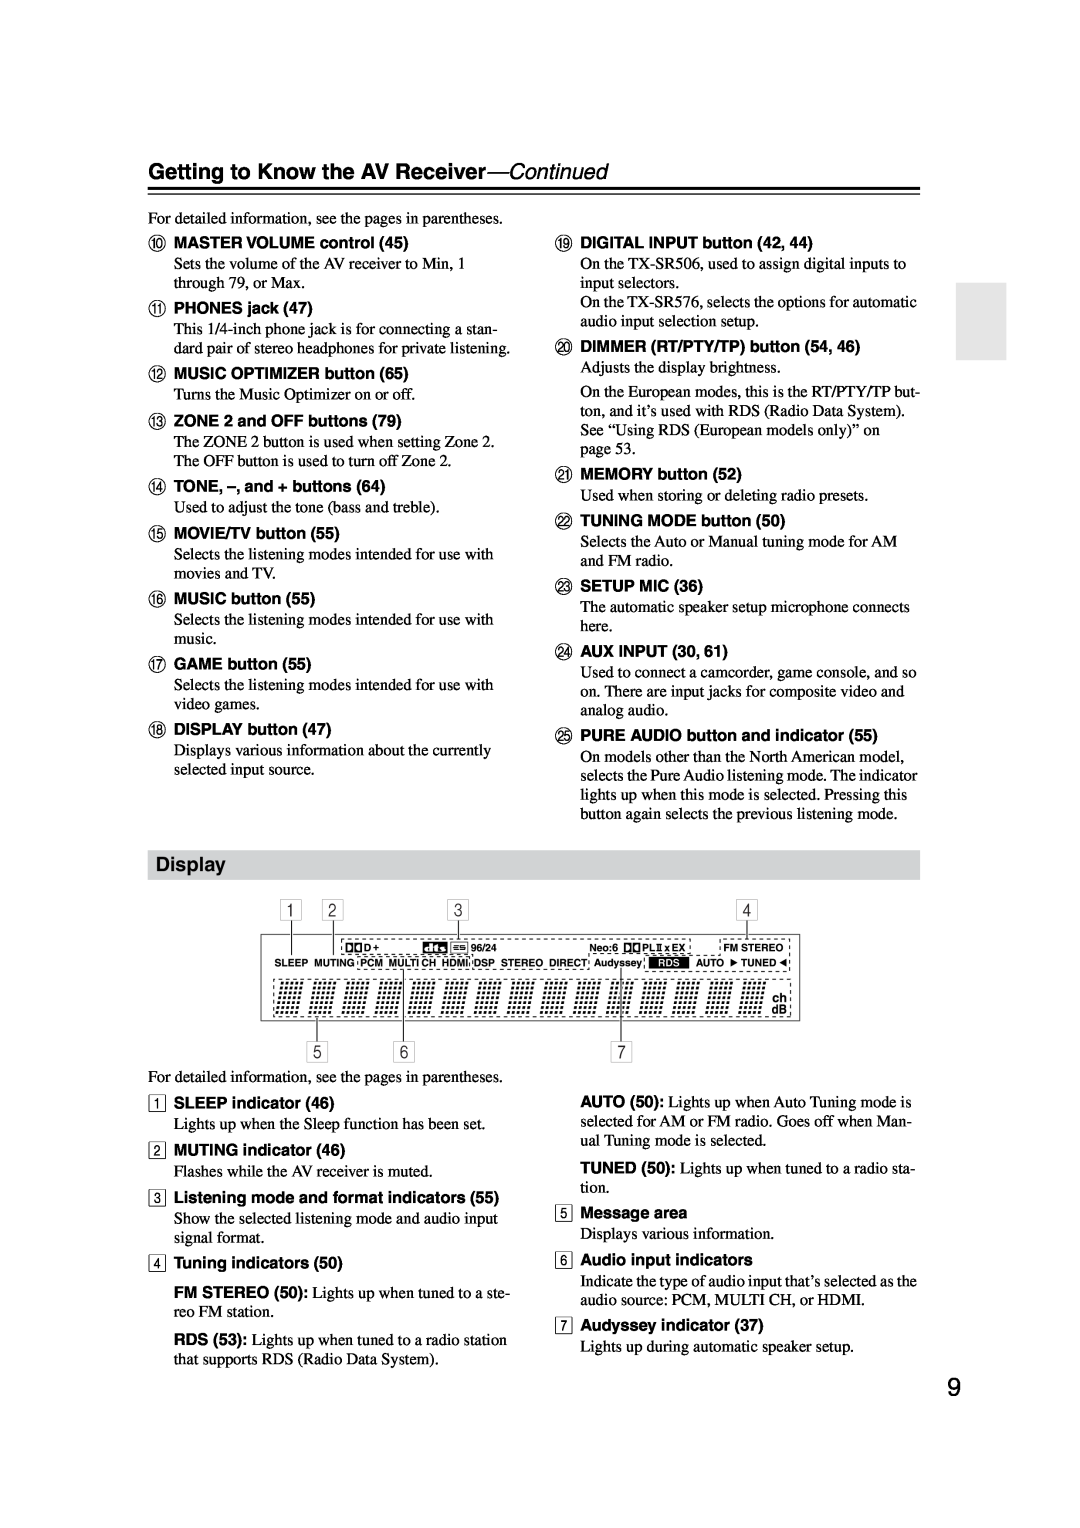 Onkyo TX-SR576, TX-SR506 instruction manual Getting to Know the AV Receiver—Continued, Display 